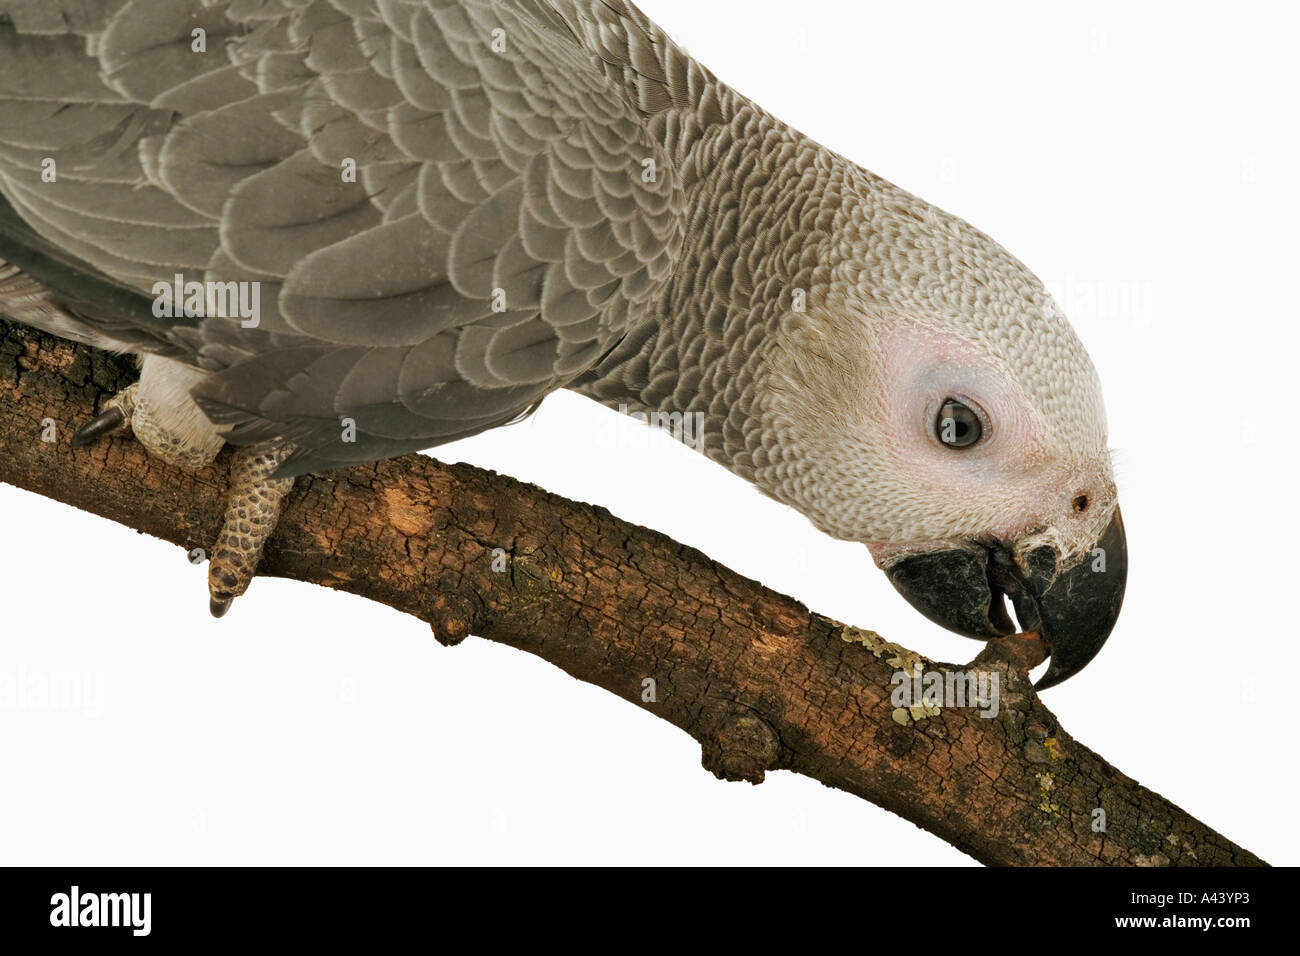 African Grey Parrot Psittacus erithacus Live in flocks of over hundred birds.Traded as pets. Found in Central and West Africa Stock Photo